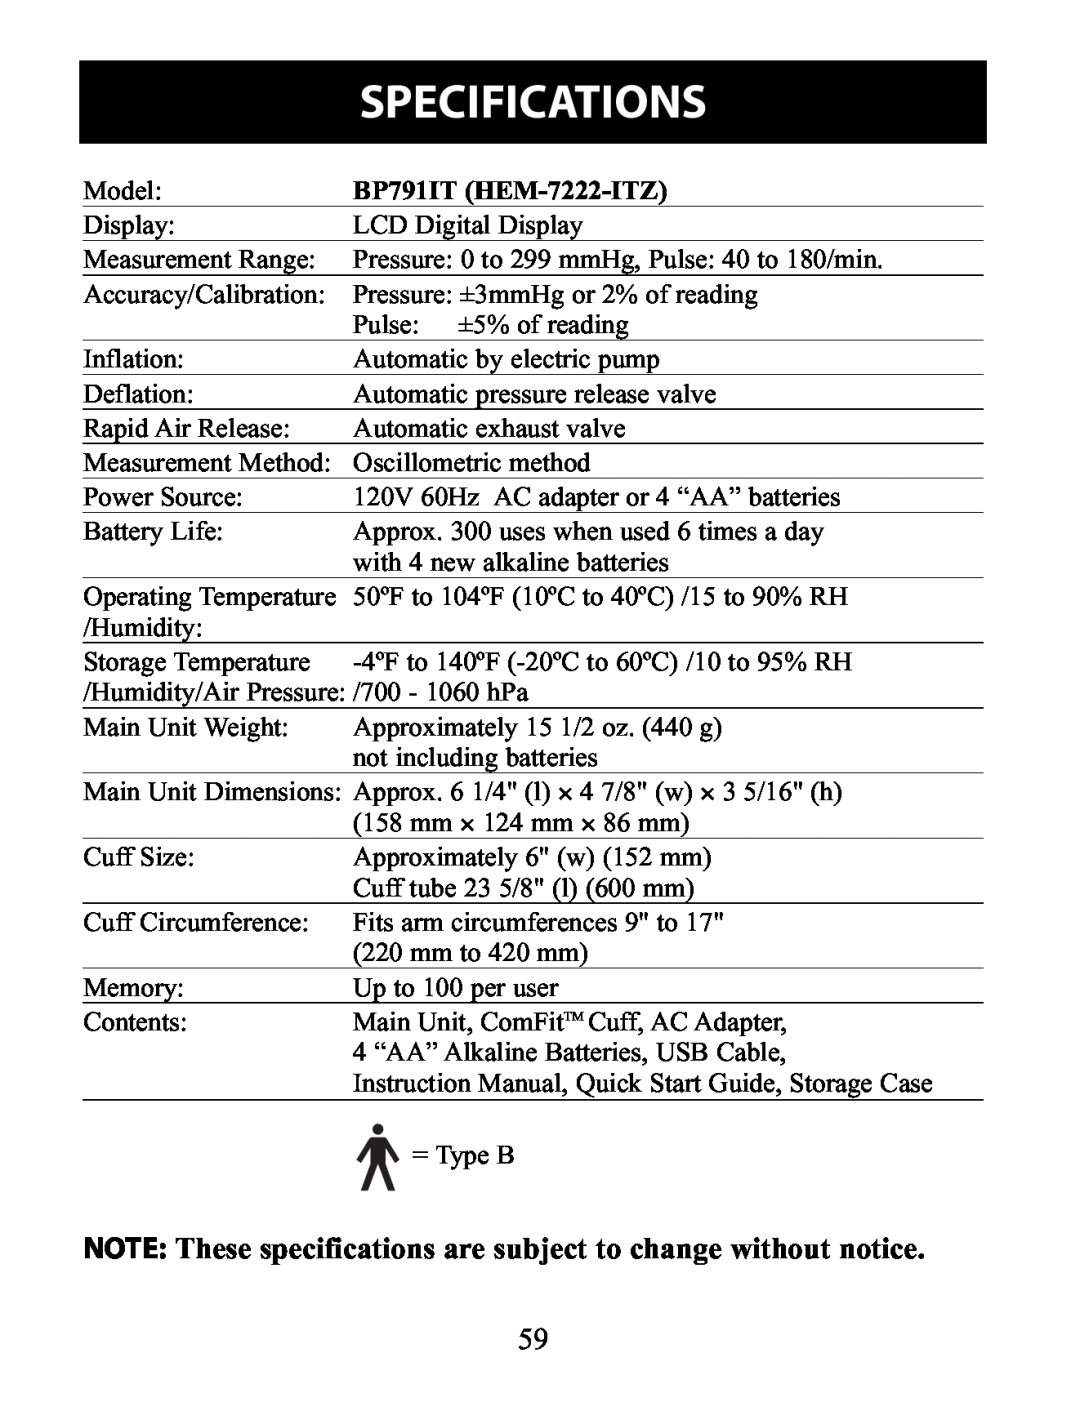 Omron Healthcare BP791IT instruction manual Specifications, NOTE These specifications are subject to change without notice 